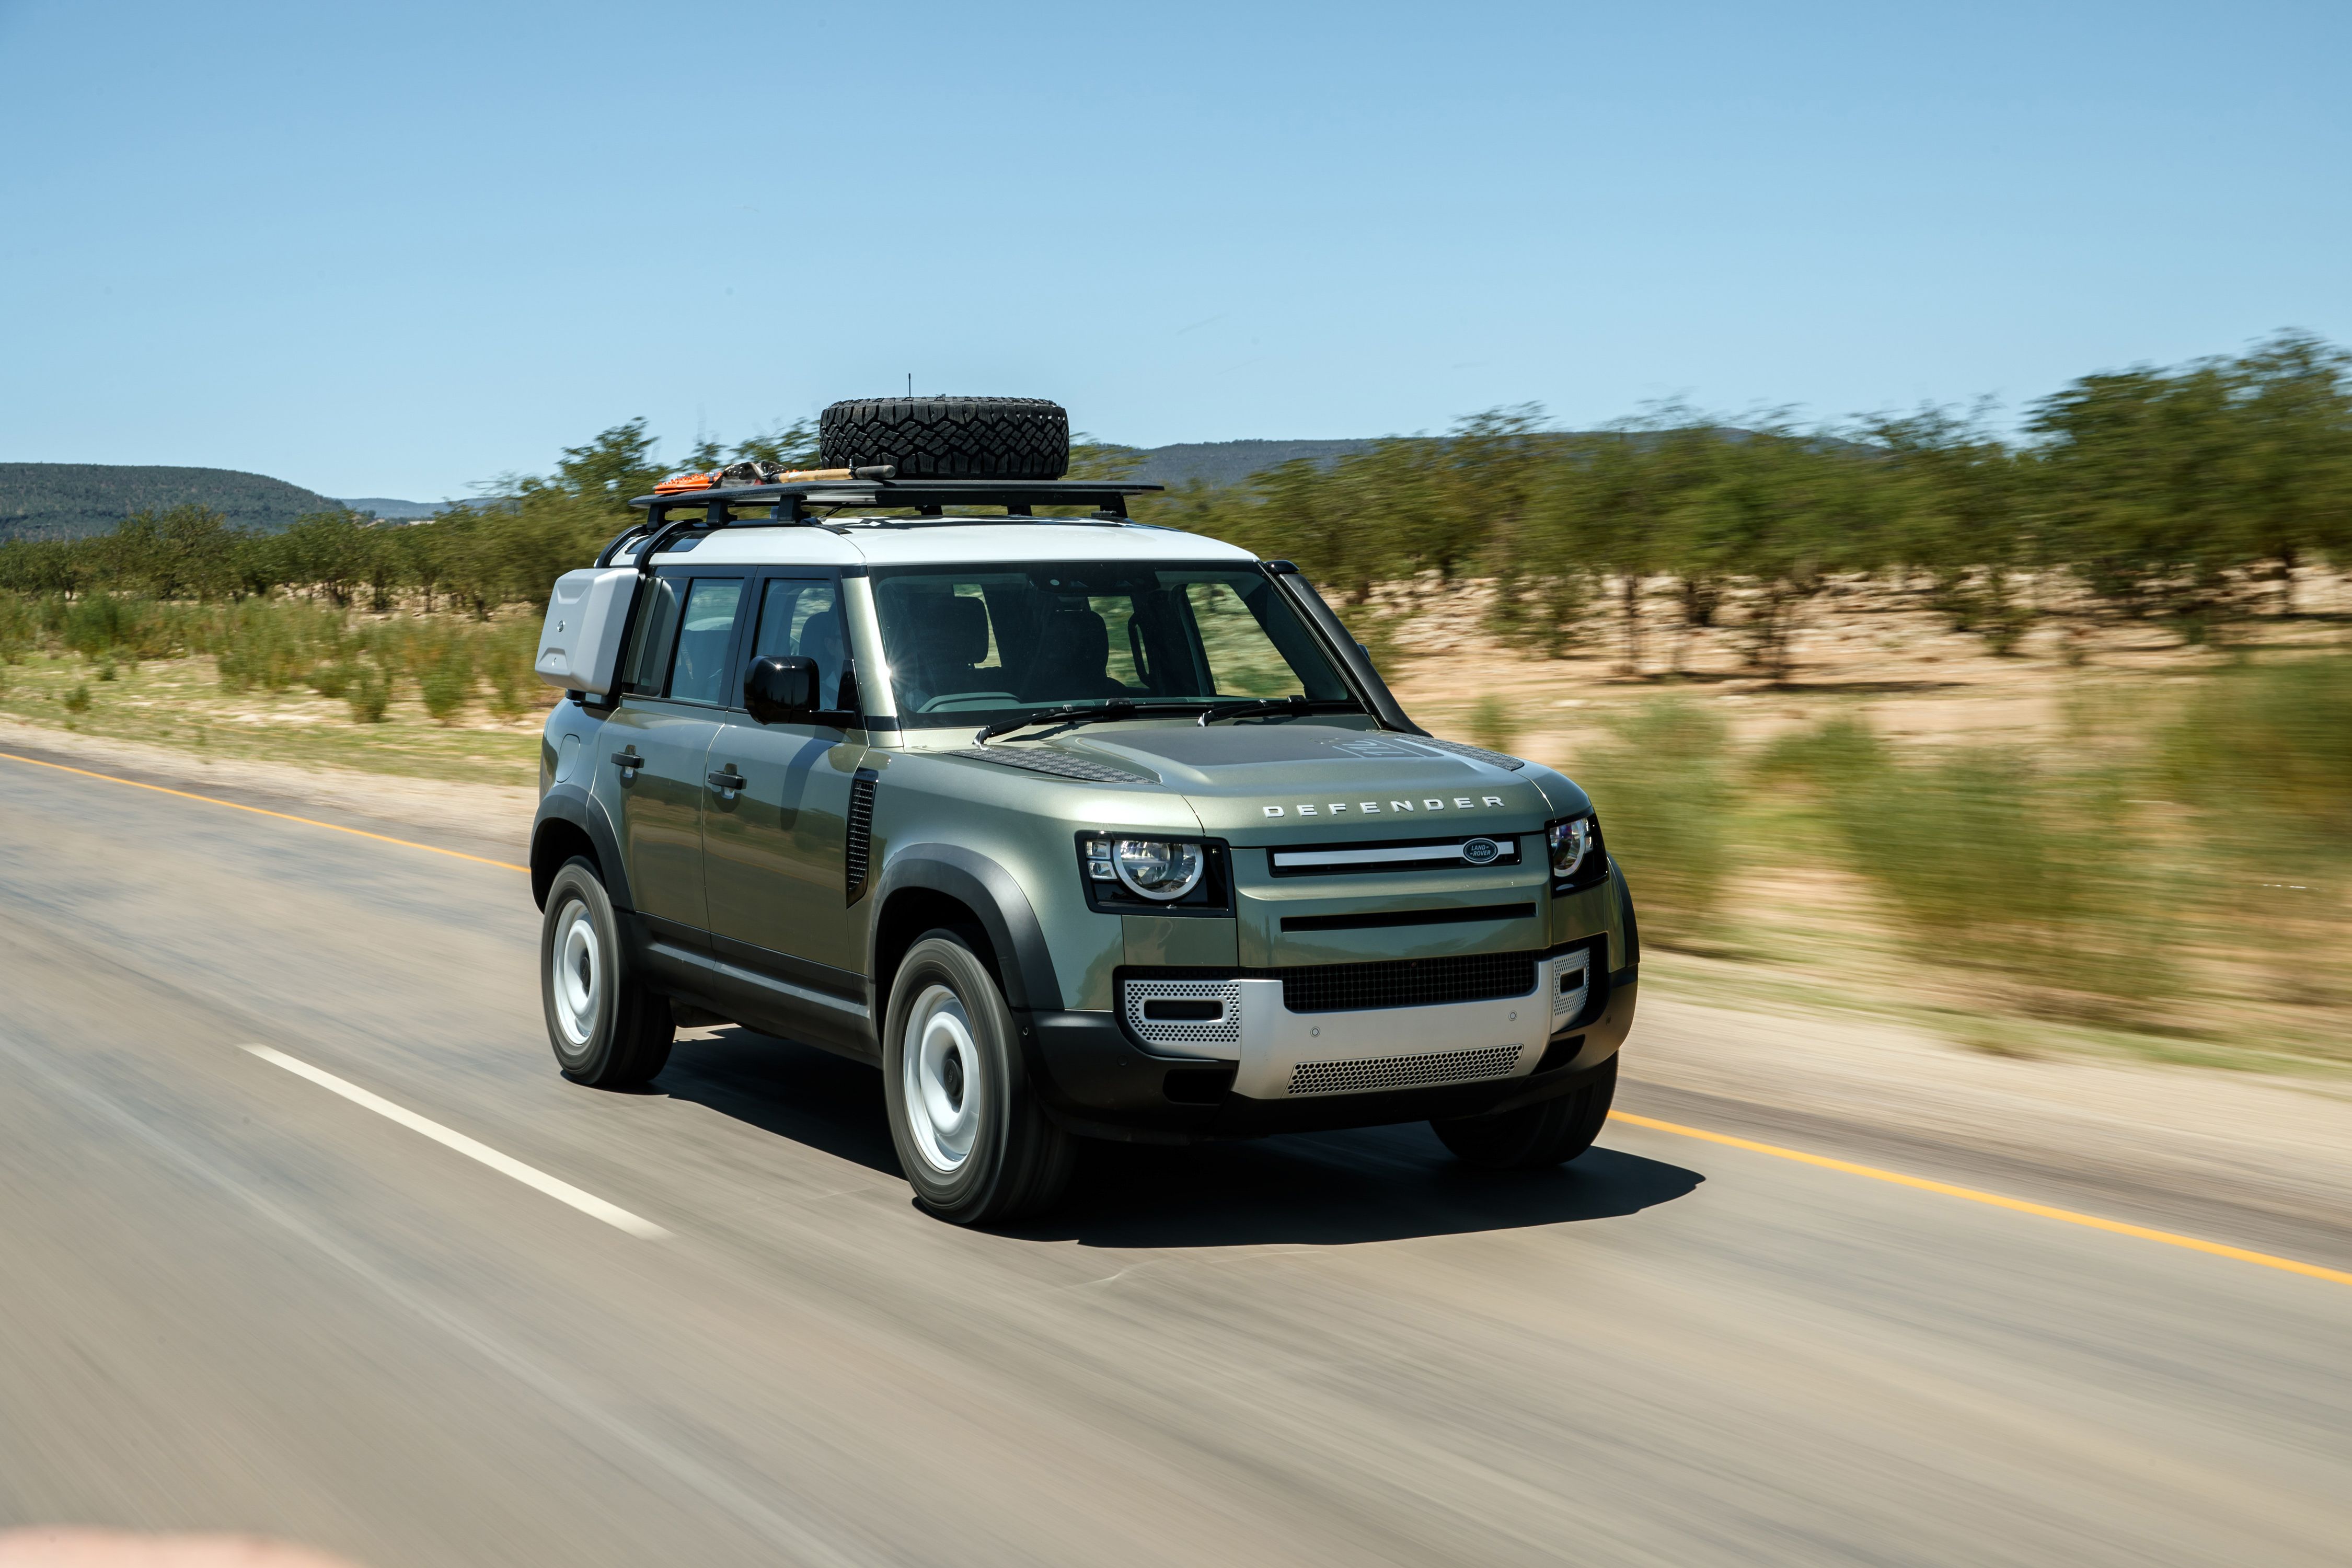 NEW 2020 Land Rover Defender FULL Information & Feature Video